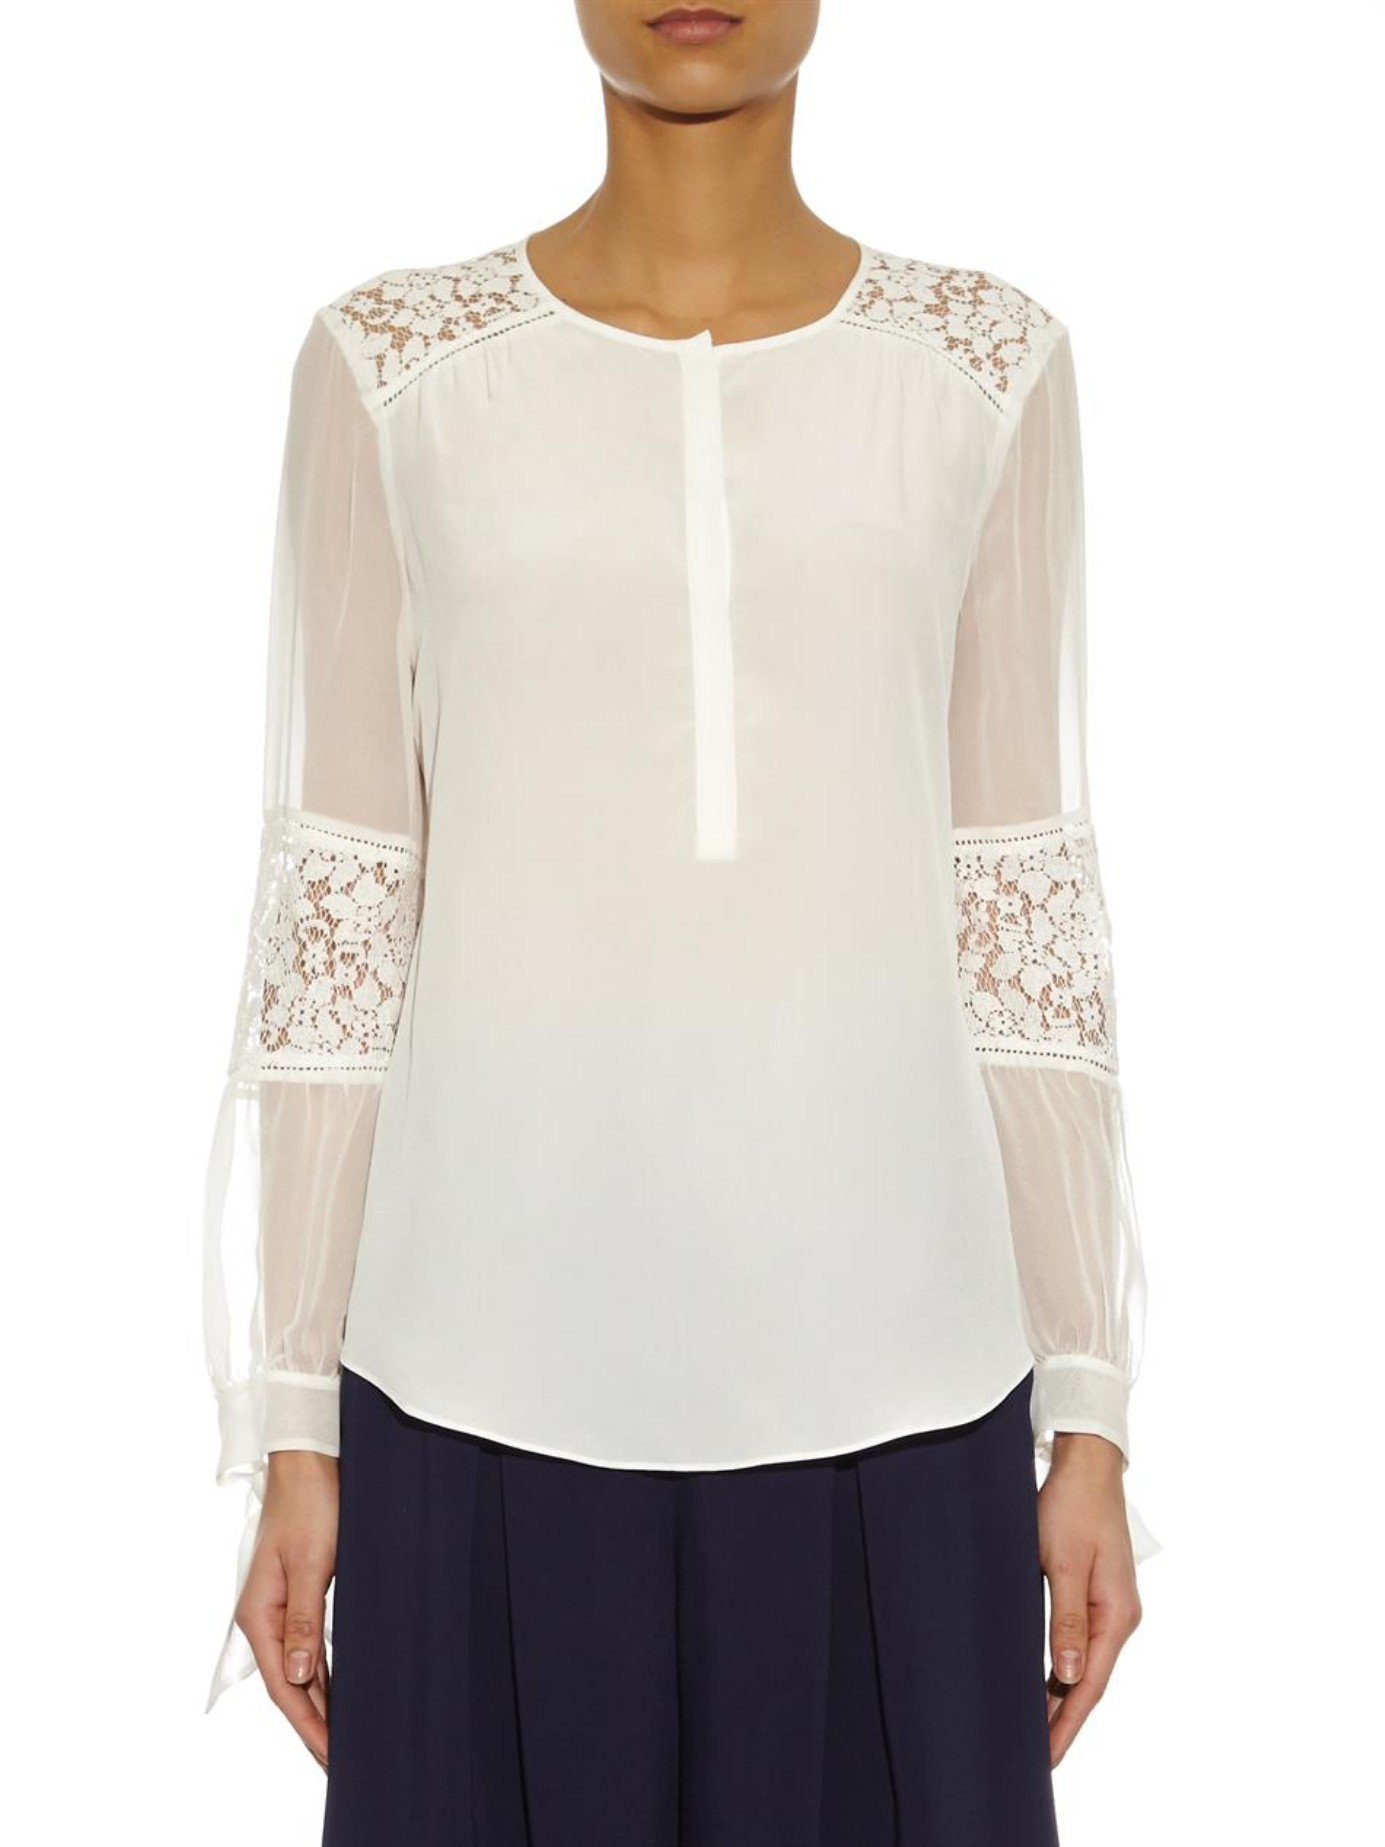 Lyst - Rebecca Taylor Silk And Lace Blouse in White